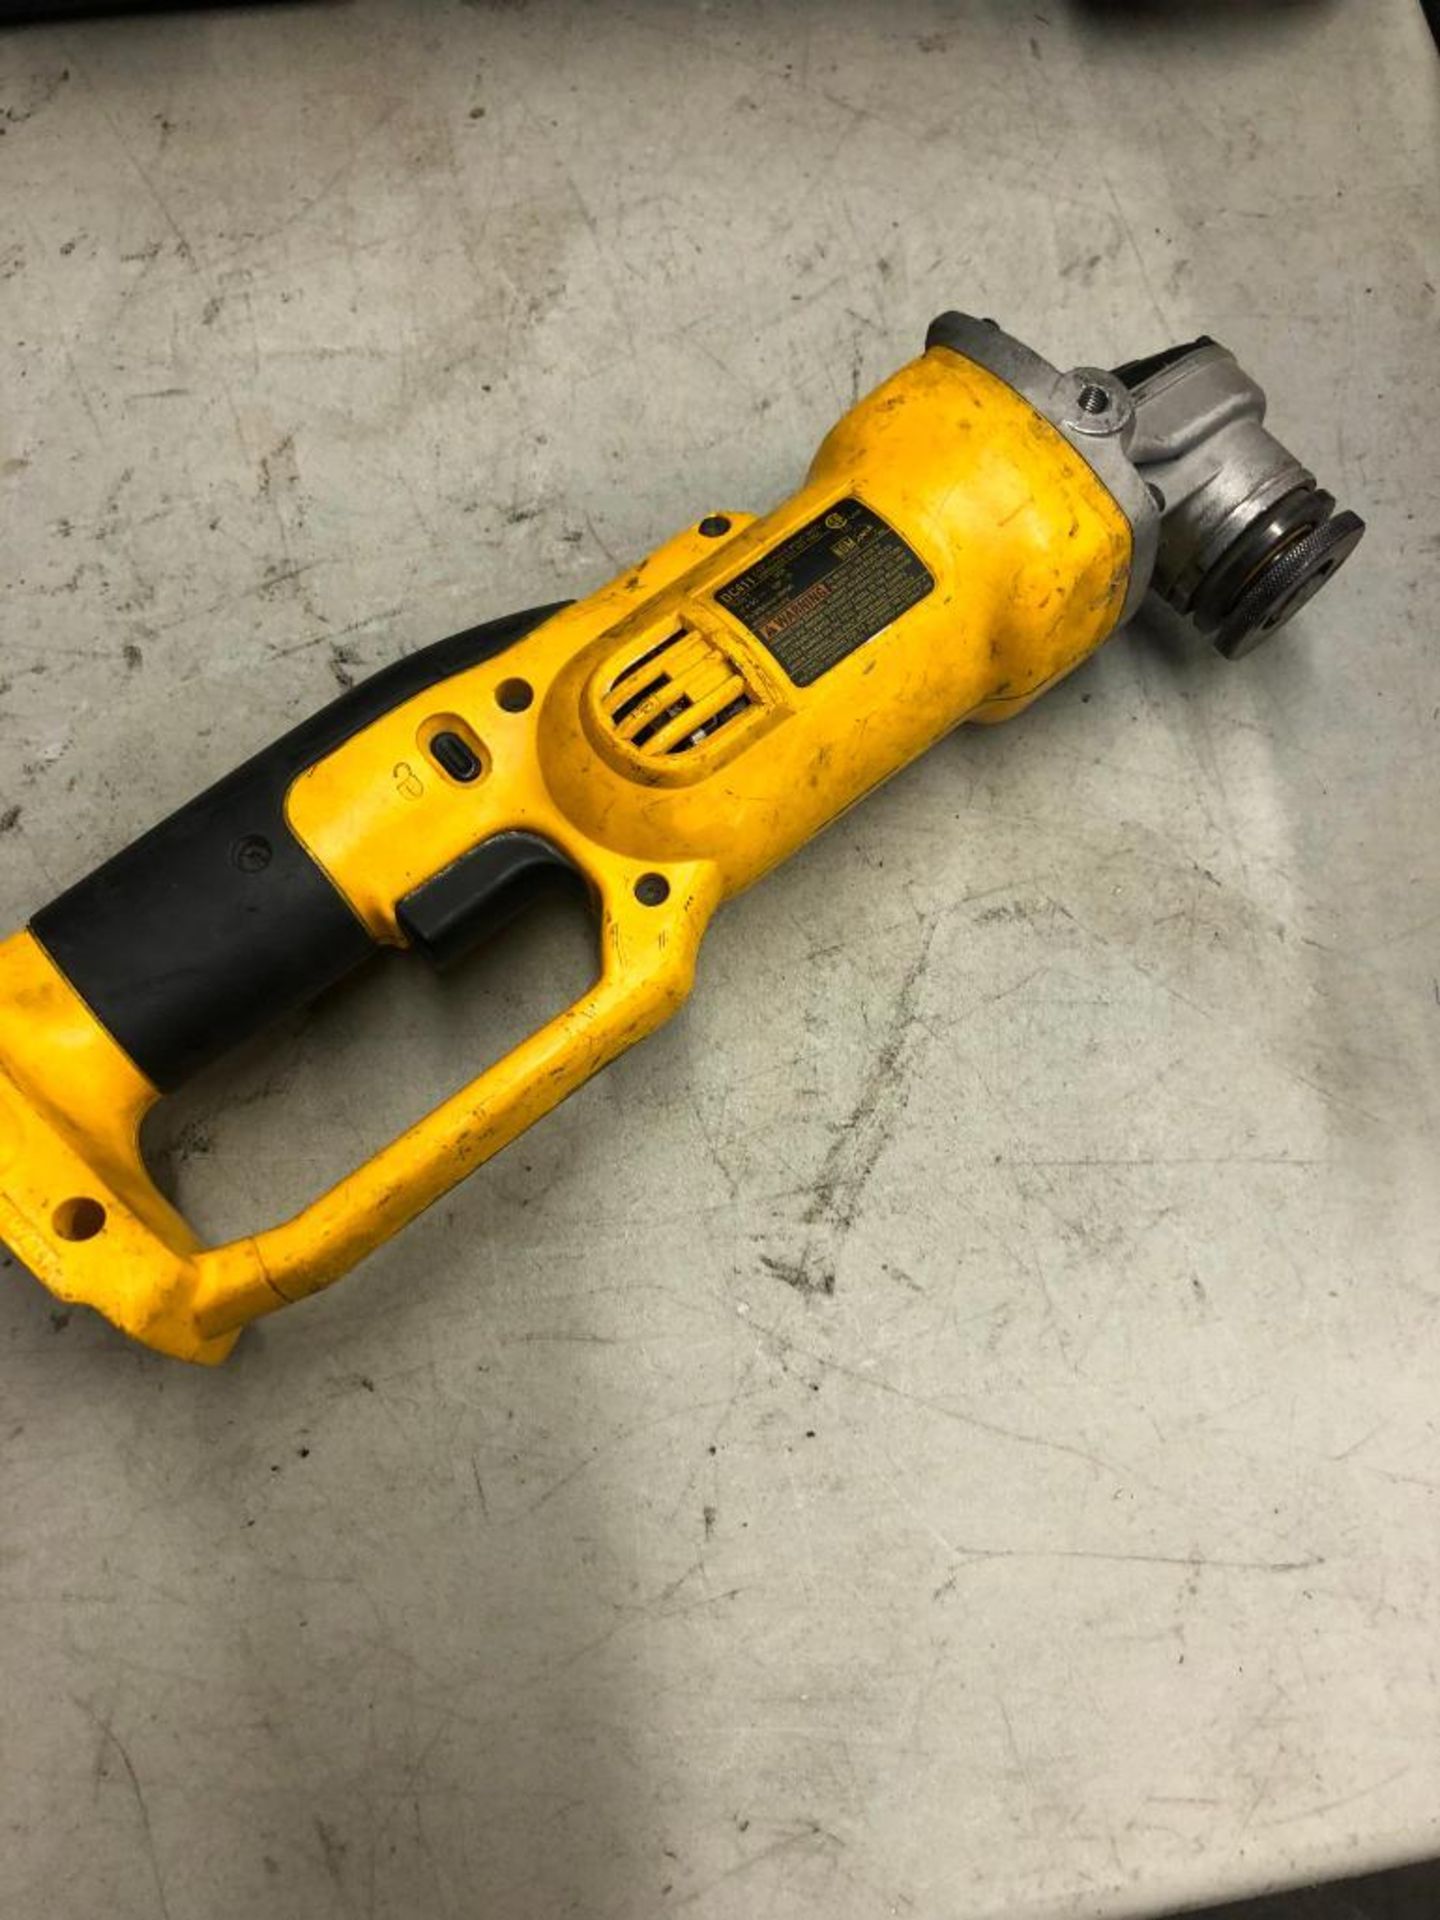 DEWALT CORDLESS 1/4'' HEAVY DUTY CUT-OFF TOOL, MODEL DC411, W/ (1) BATTERY AND CHARGER - Image 4 of 5